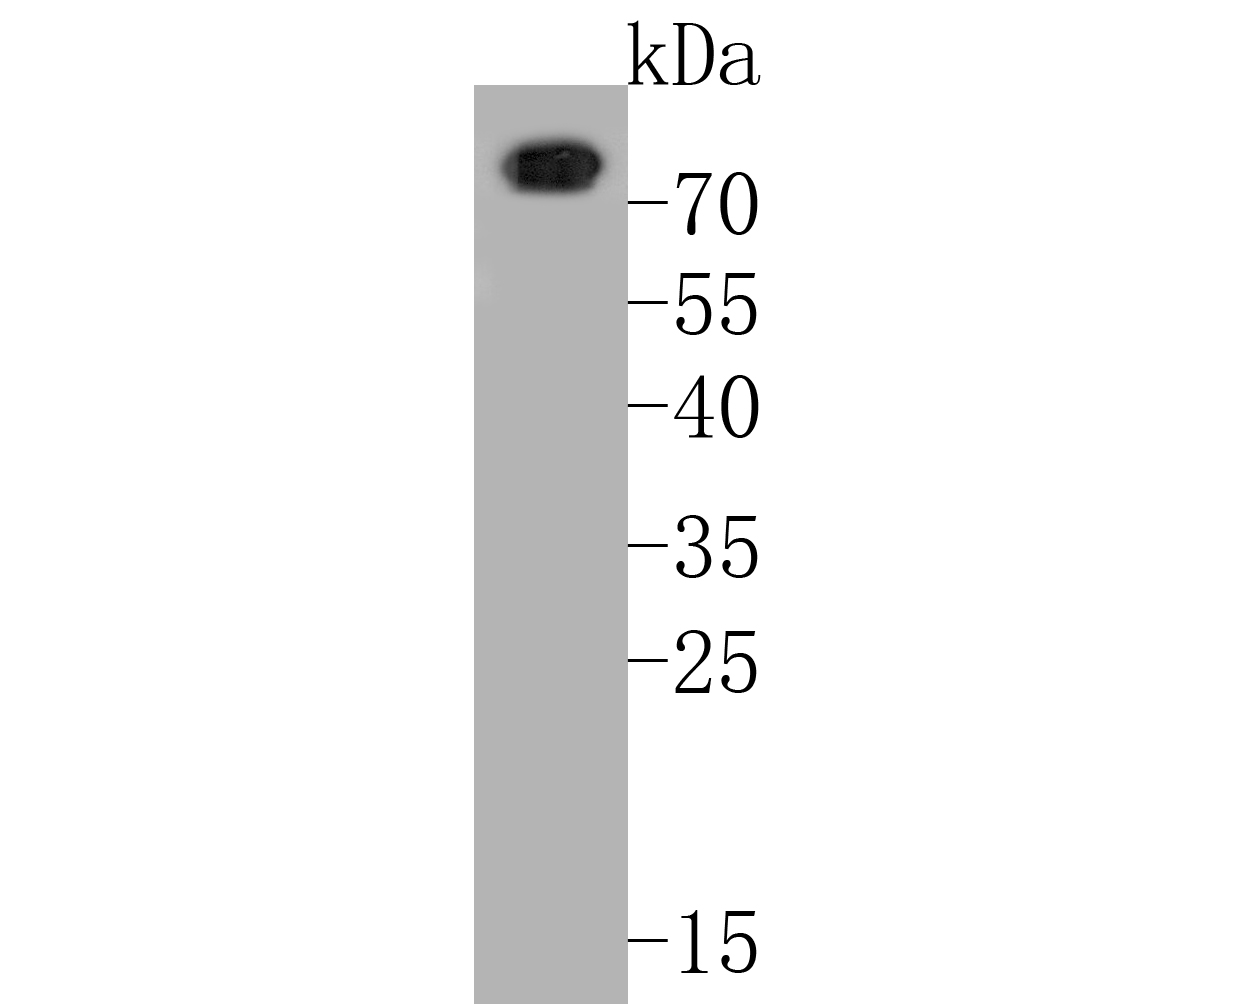 Western blot analysis of CD68 on human spleen tissue lysates. Proteins were transferred to a PVDF membrane and blocked with 5% BSA in PBS for 1 hour at room temperature. The primary antibody (ER1902-21, 1/500) was used in 5% BSA at room temperature for 2 hours. Goat Anti-Rabbit IgG - HRP Secondary Antibody (HA1001) at 1:5,000 dilution was used for 1 hour at room temperature.